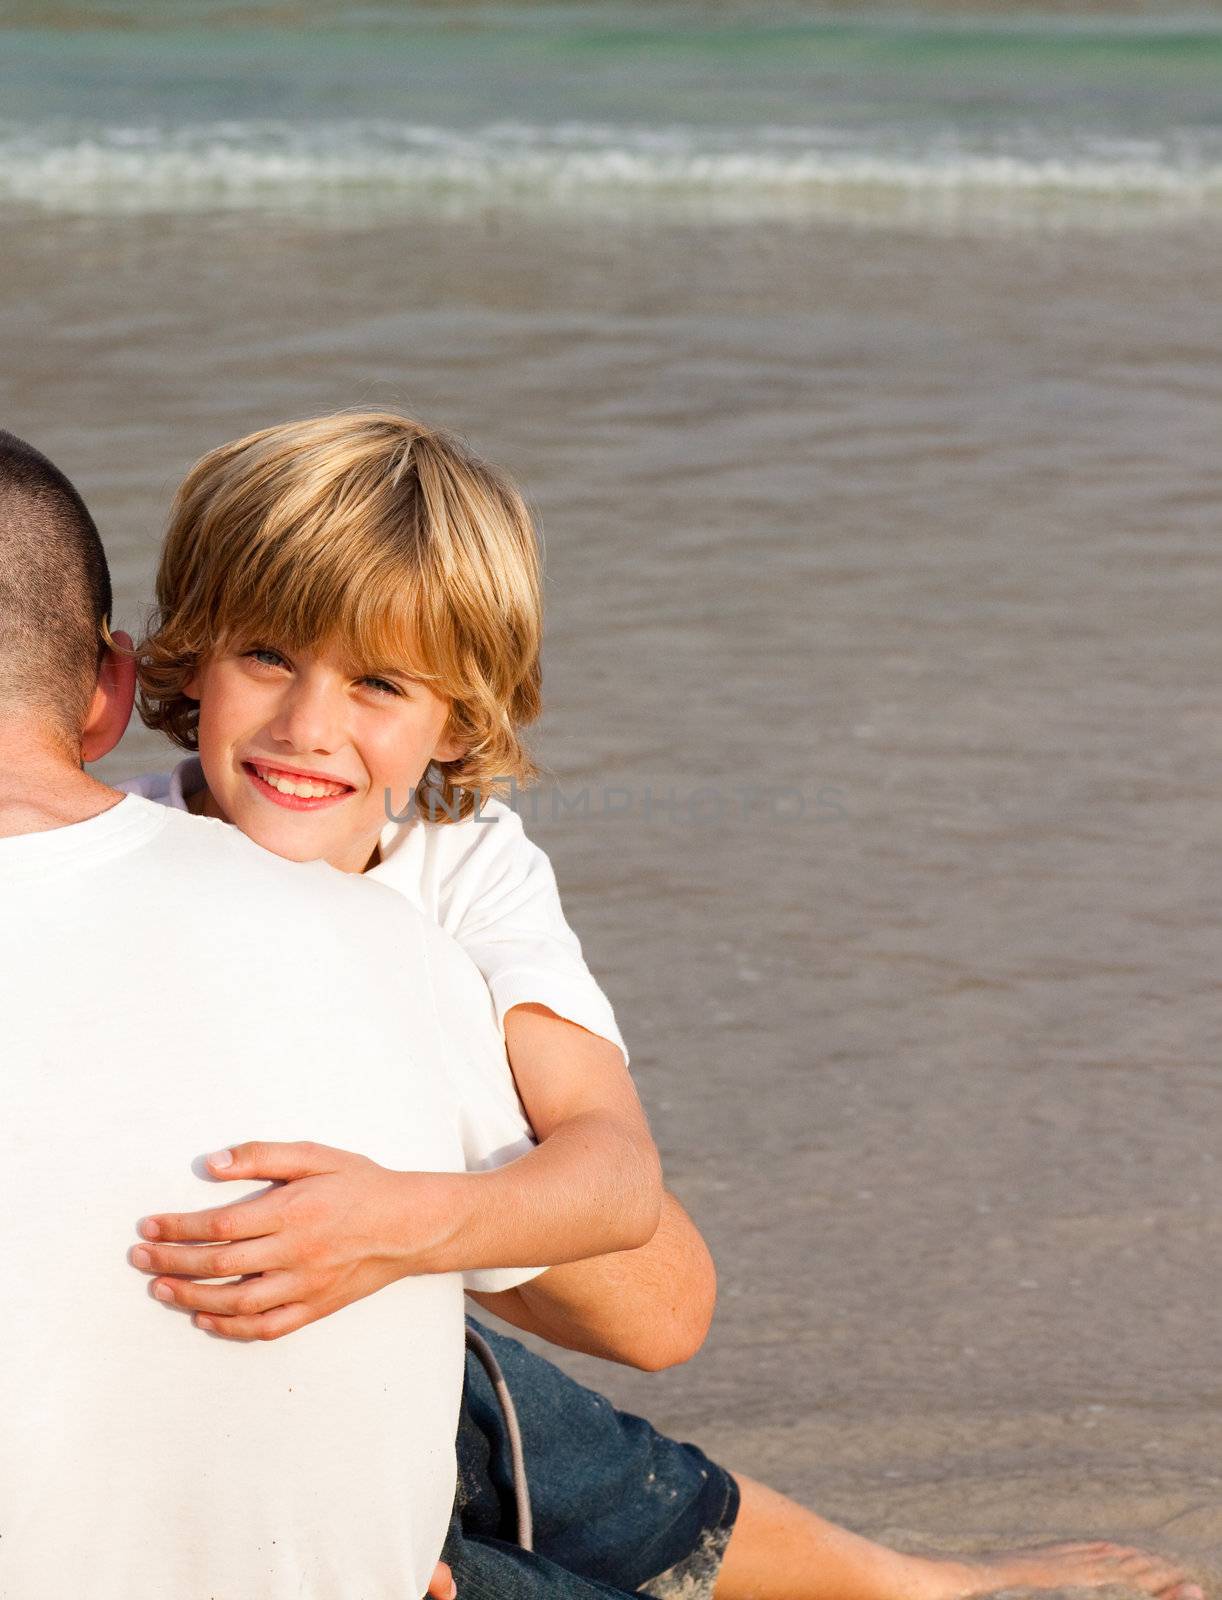 Blond boy and his father on a beach